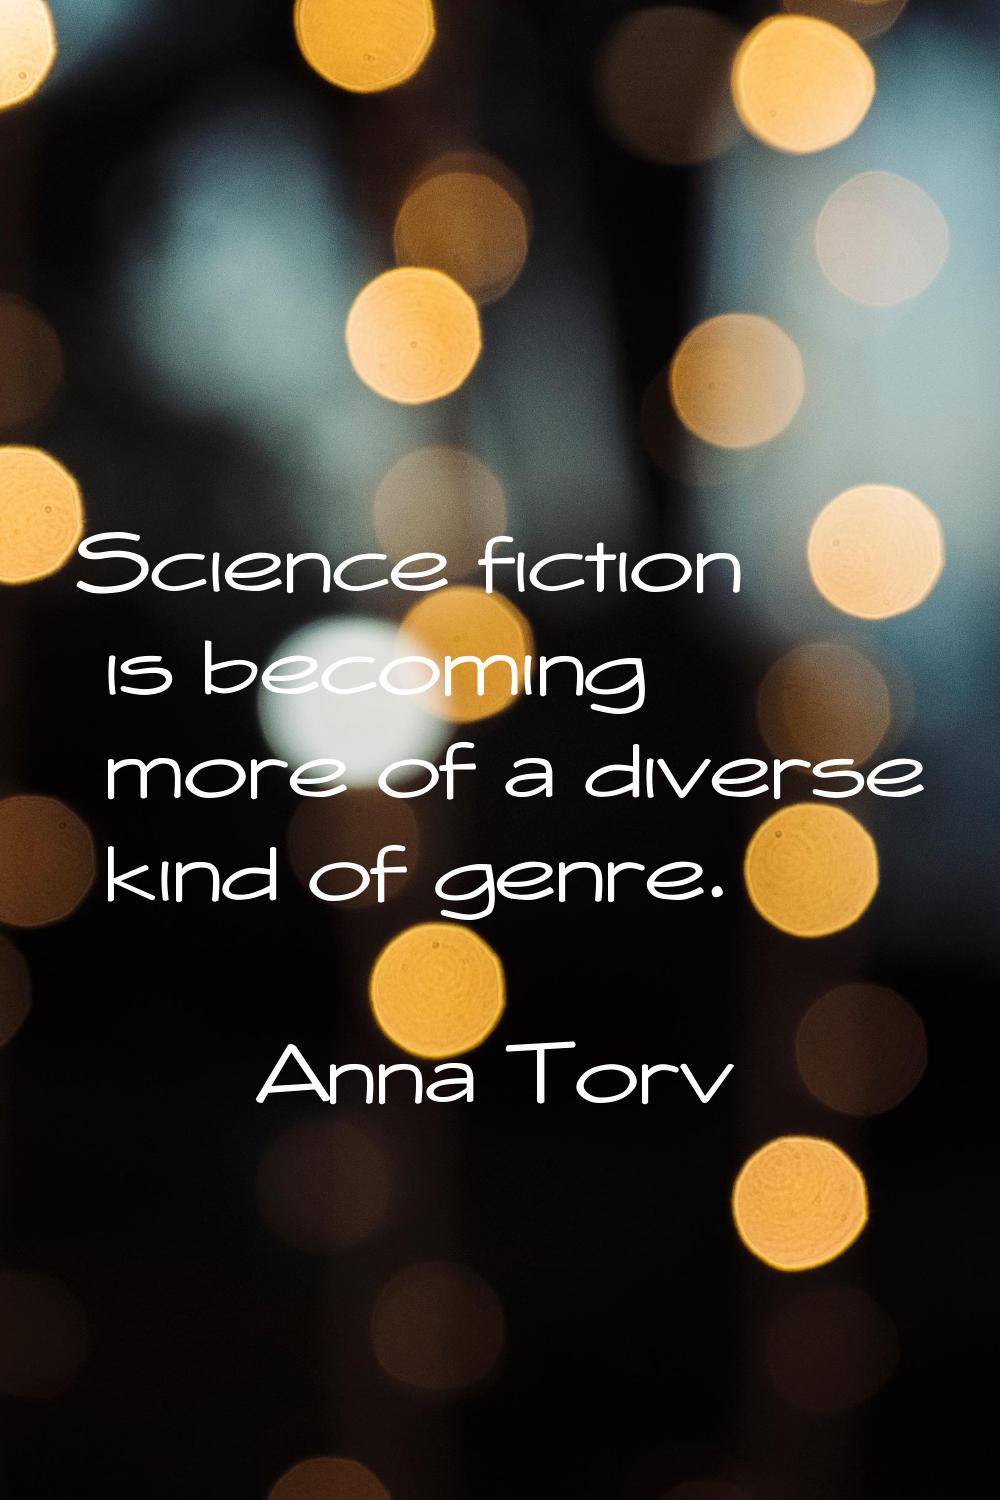 Science fiction is becoming more of a diverse kind of genre.